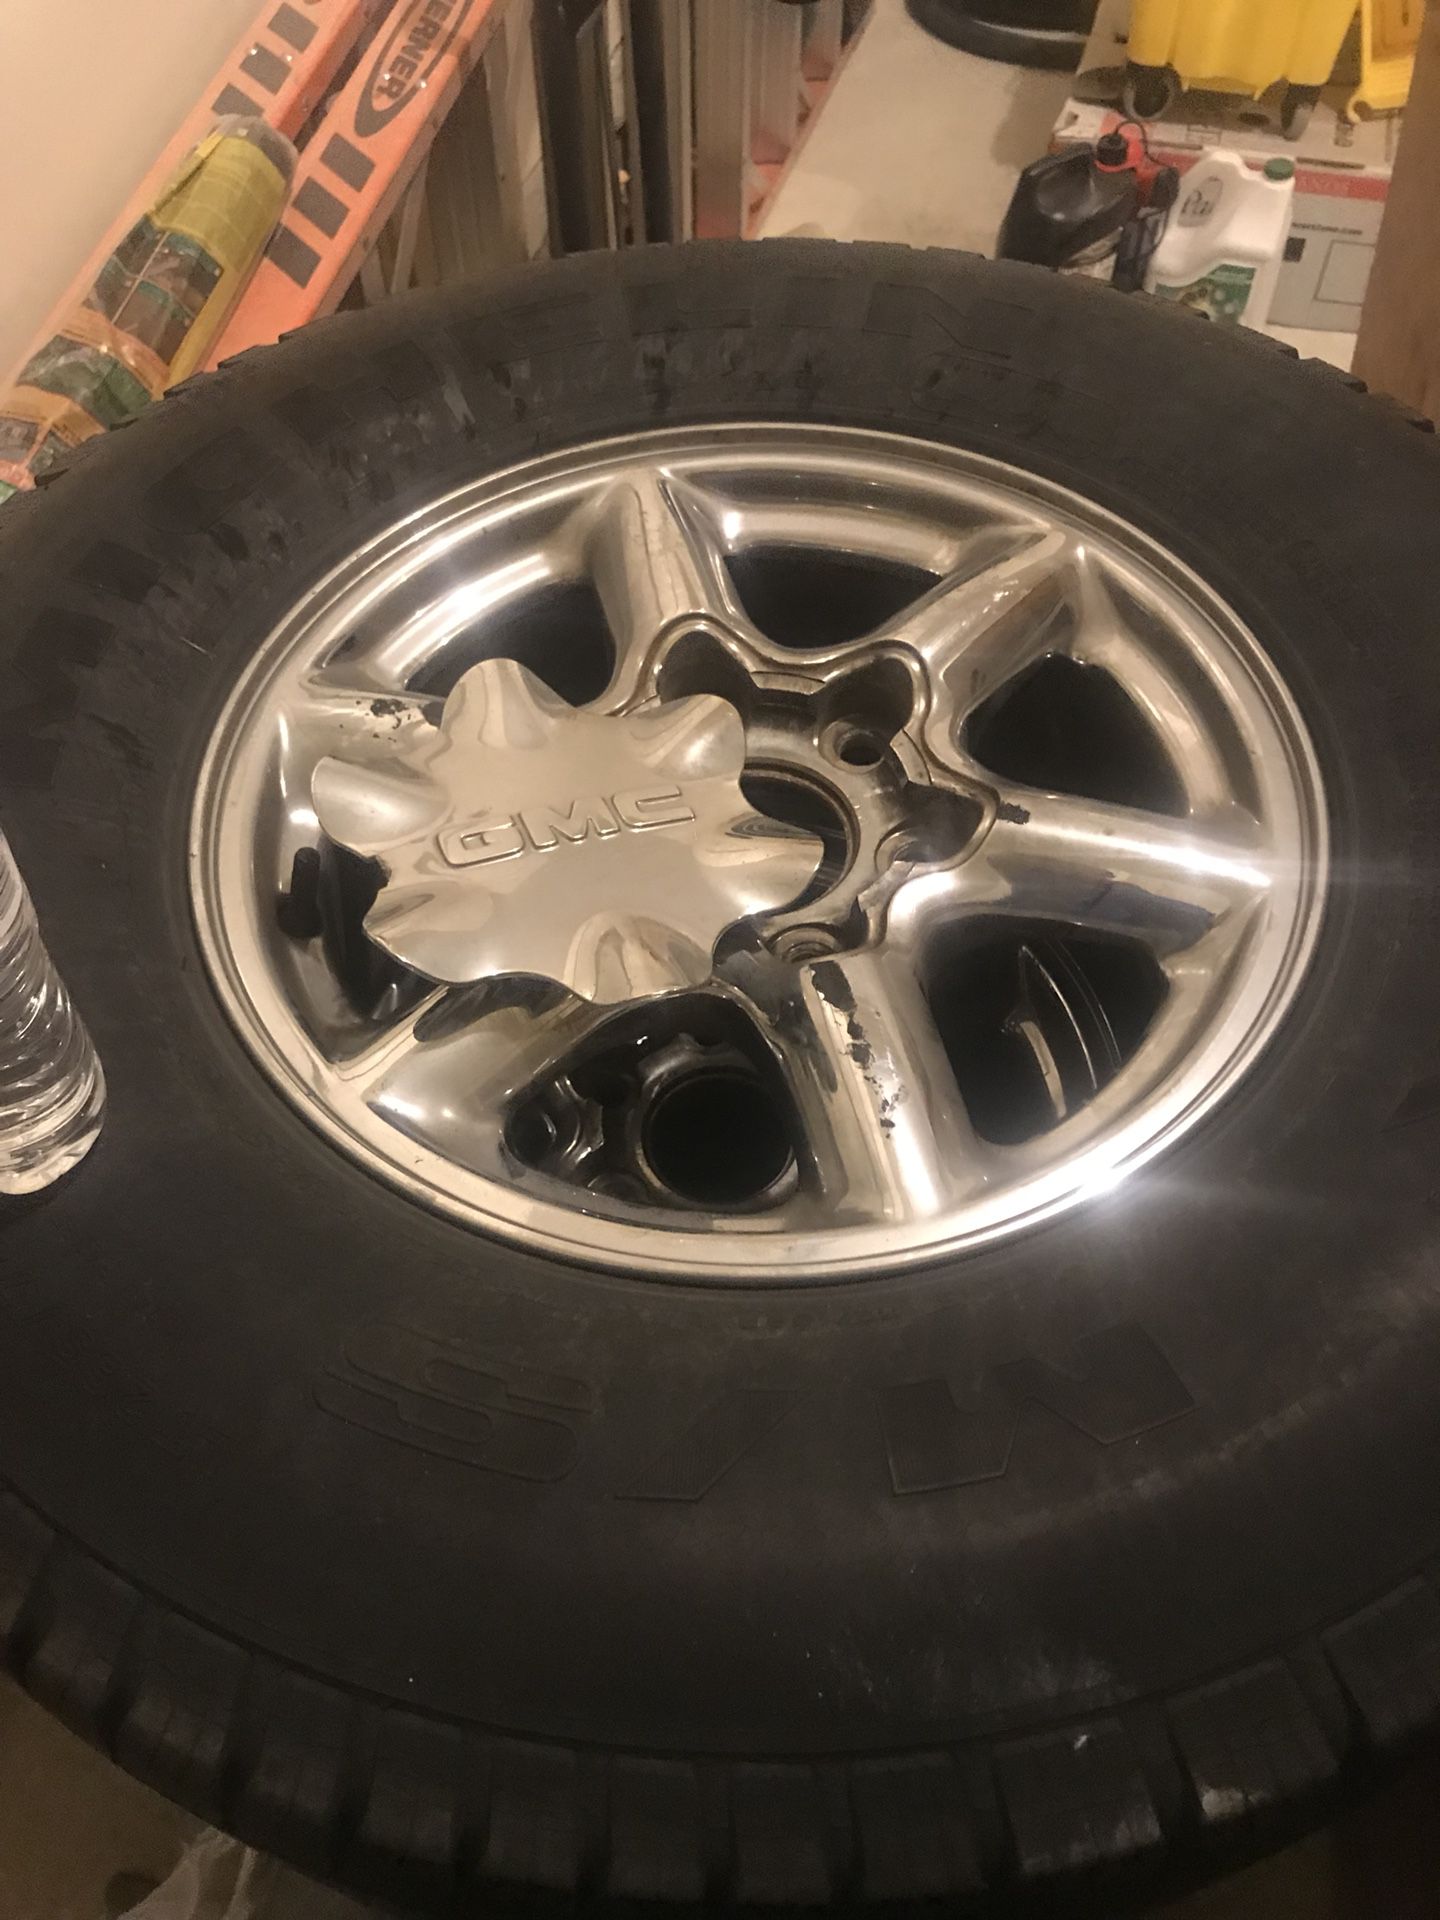 GMC Truck Rims and Tires $300 obo